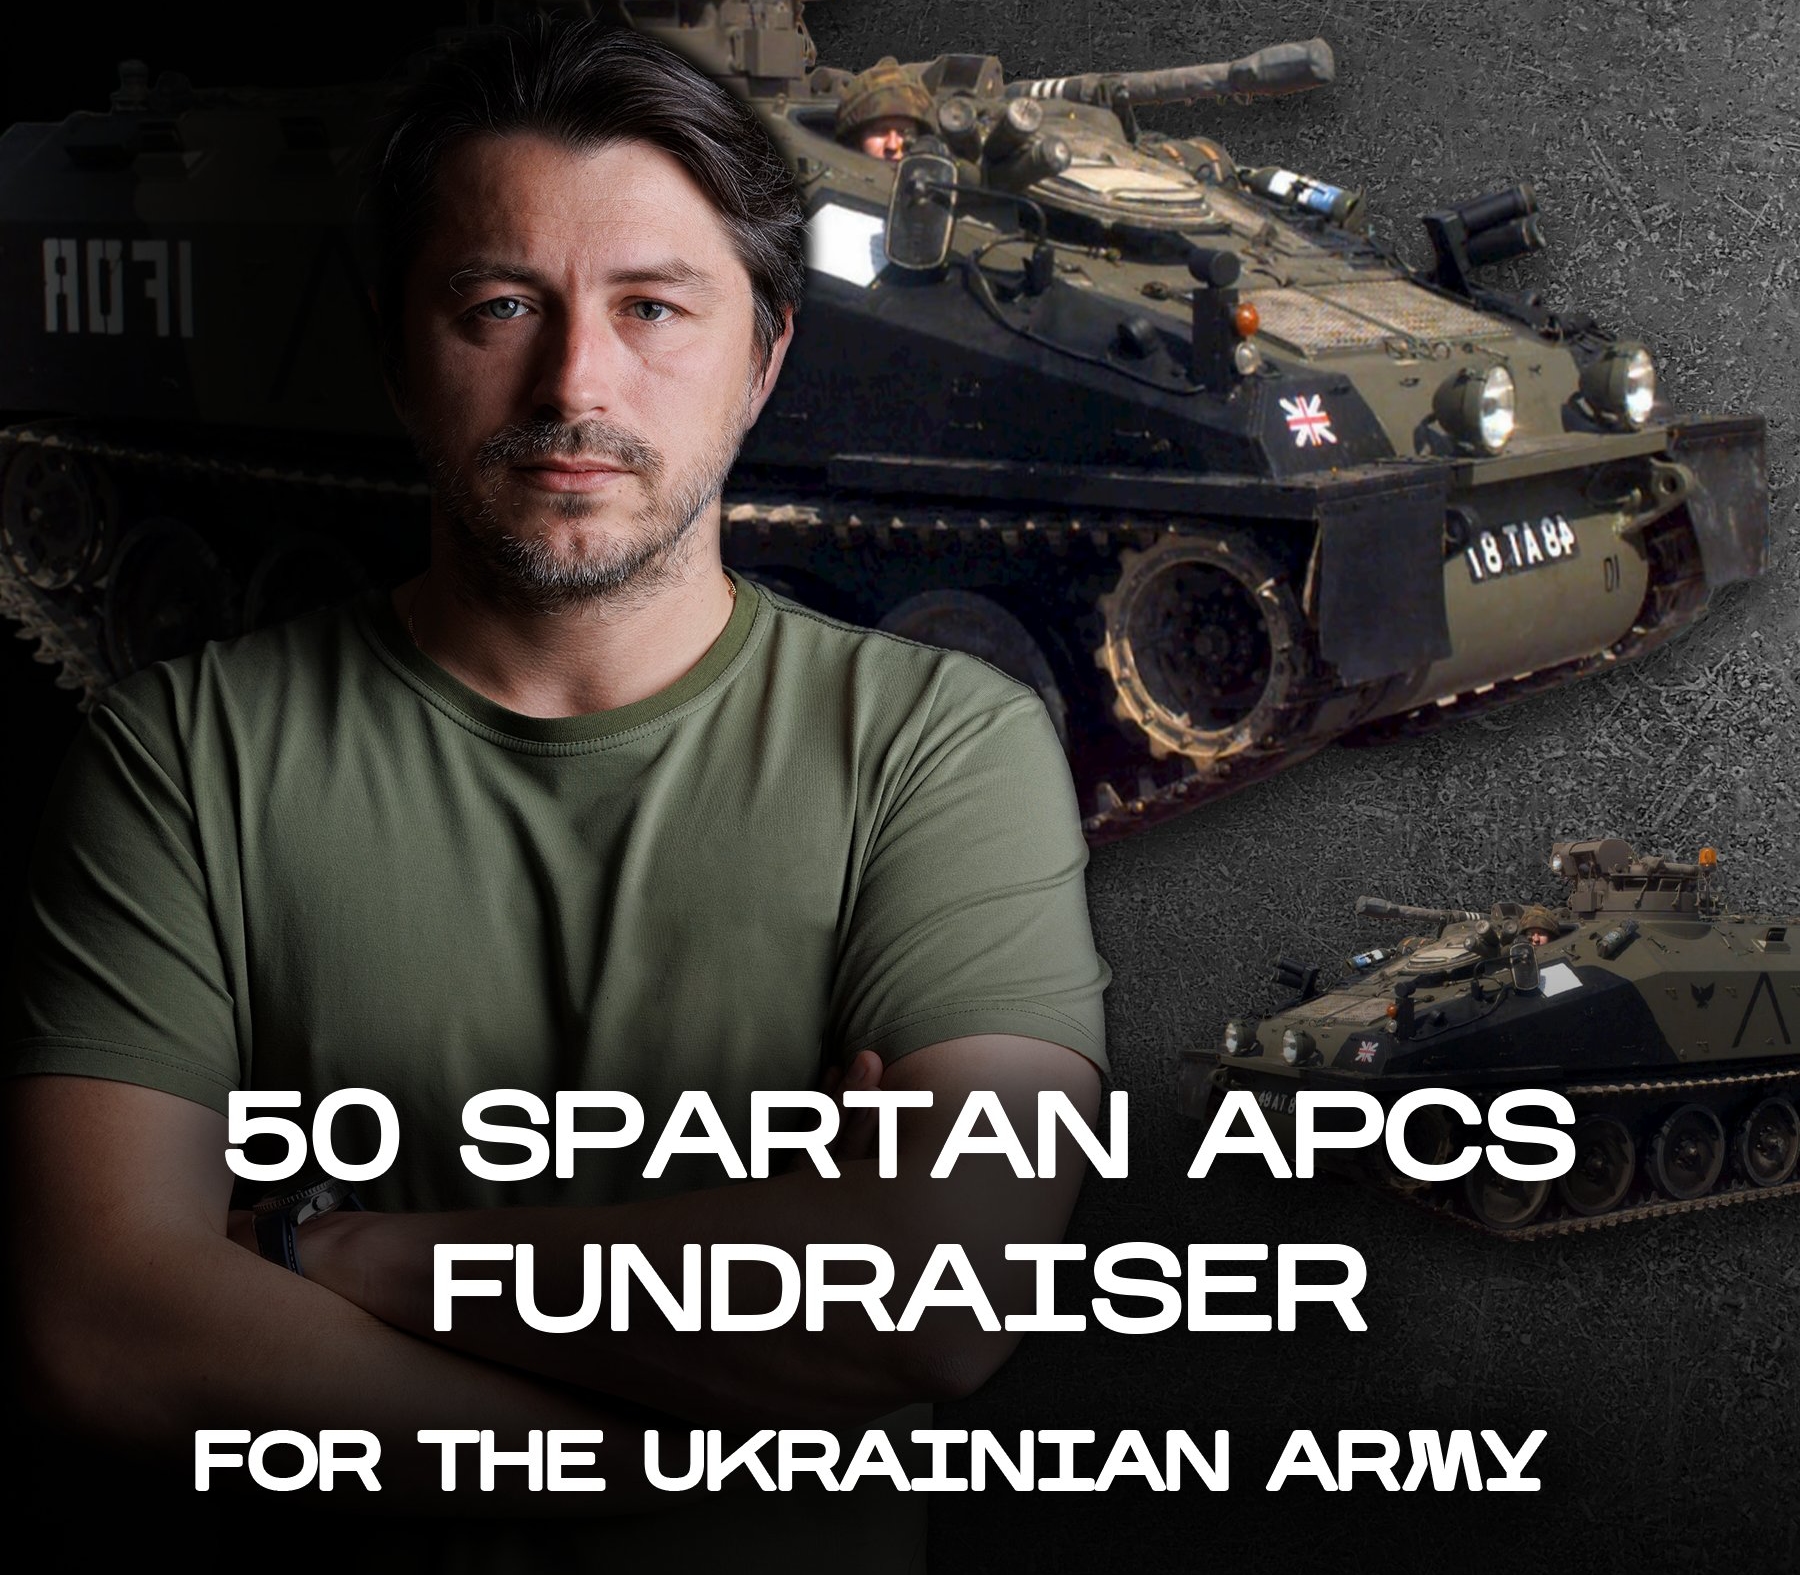 Ukrainian volunteers are raising $5,470,000 and want to buy 50 British Spartan tracked armored personnel carriers for the AFU